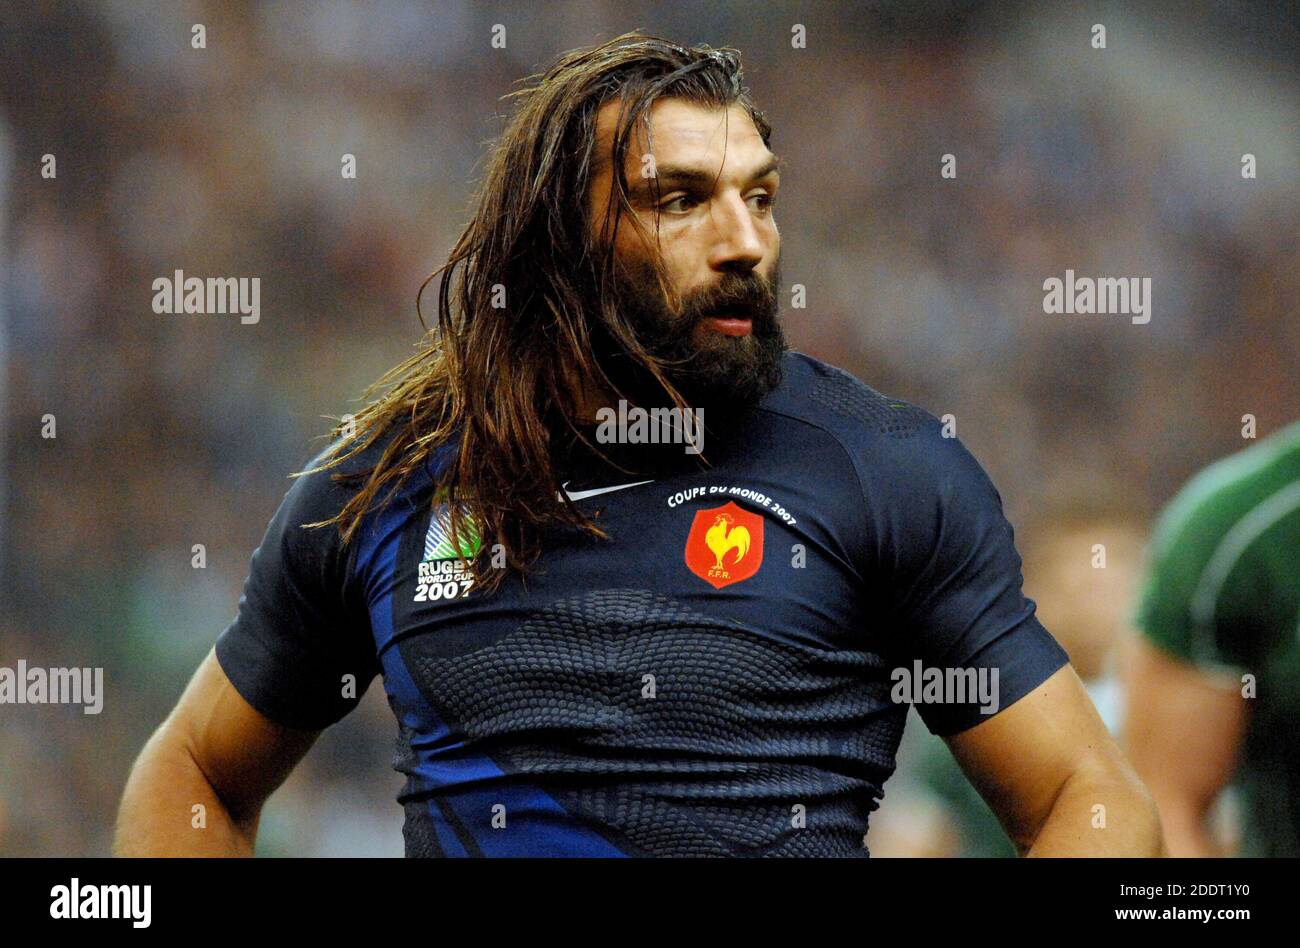 French rugby player, Sebastien Chabal, looks forward on during Rugby World Cup, France 2007, in Paris. Stock Photo